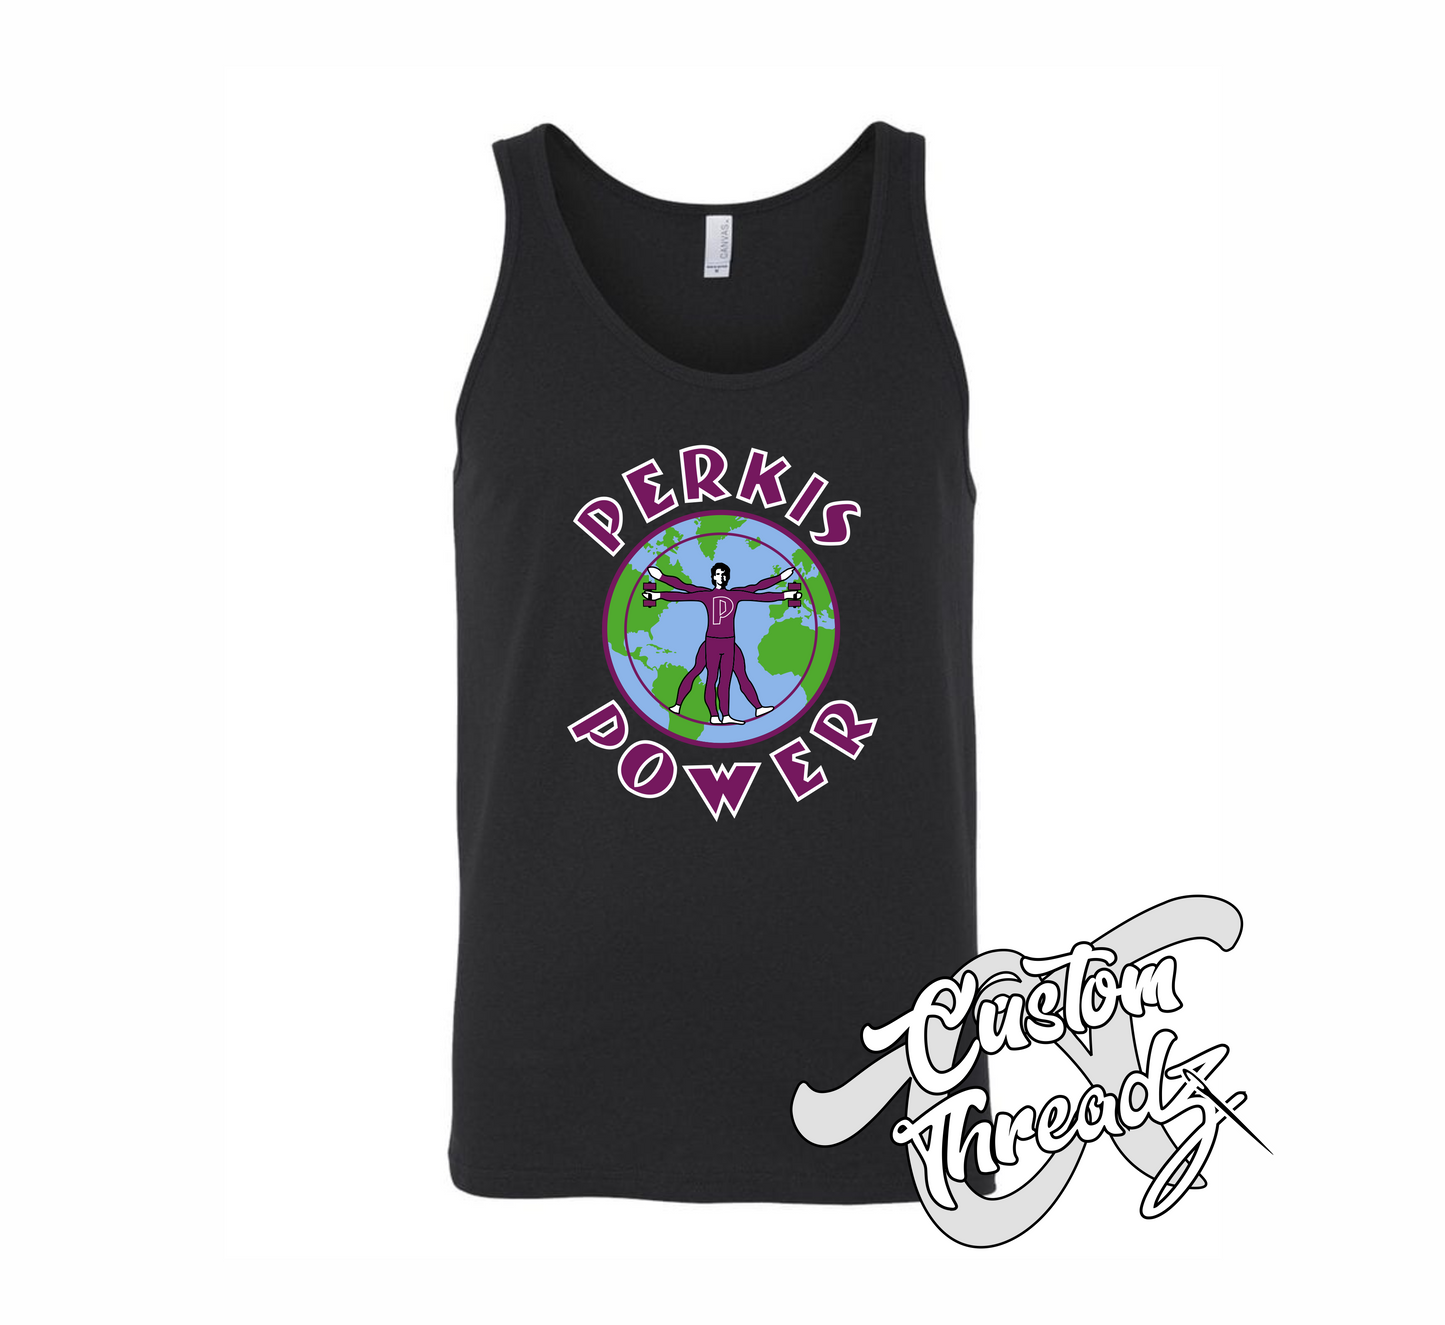 black tank top with perkis power heavyweights DTG printed design